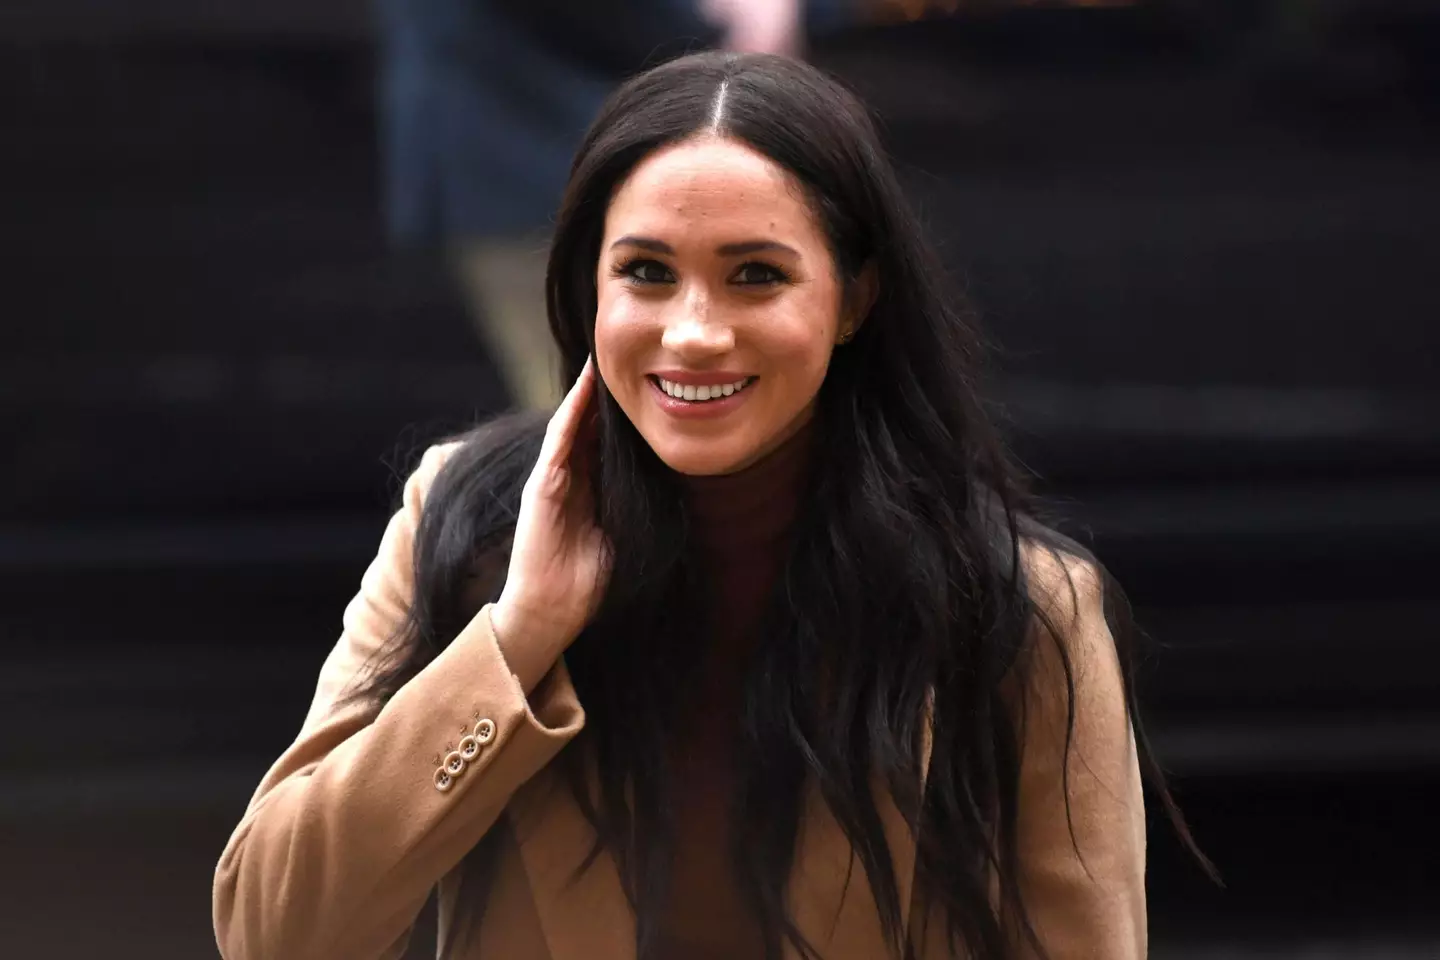 Meghan Markle didn't attend the coronation. That we know of.